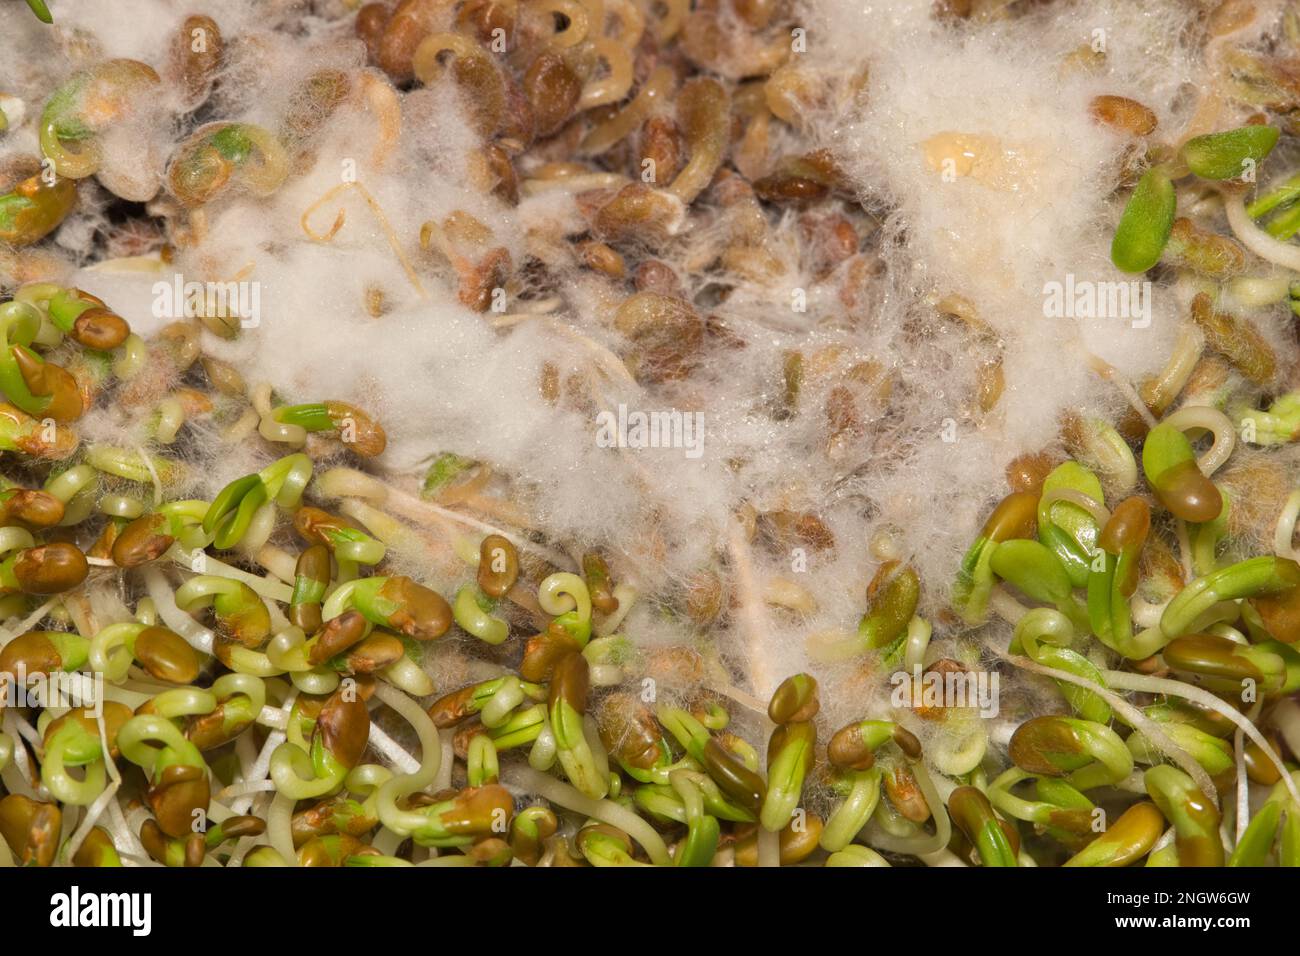 Rotten alfalfa sprouts with white mold growing on it, directly above macro image. Expired food health concept. Stock Photo